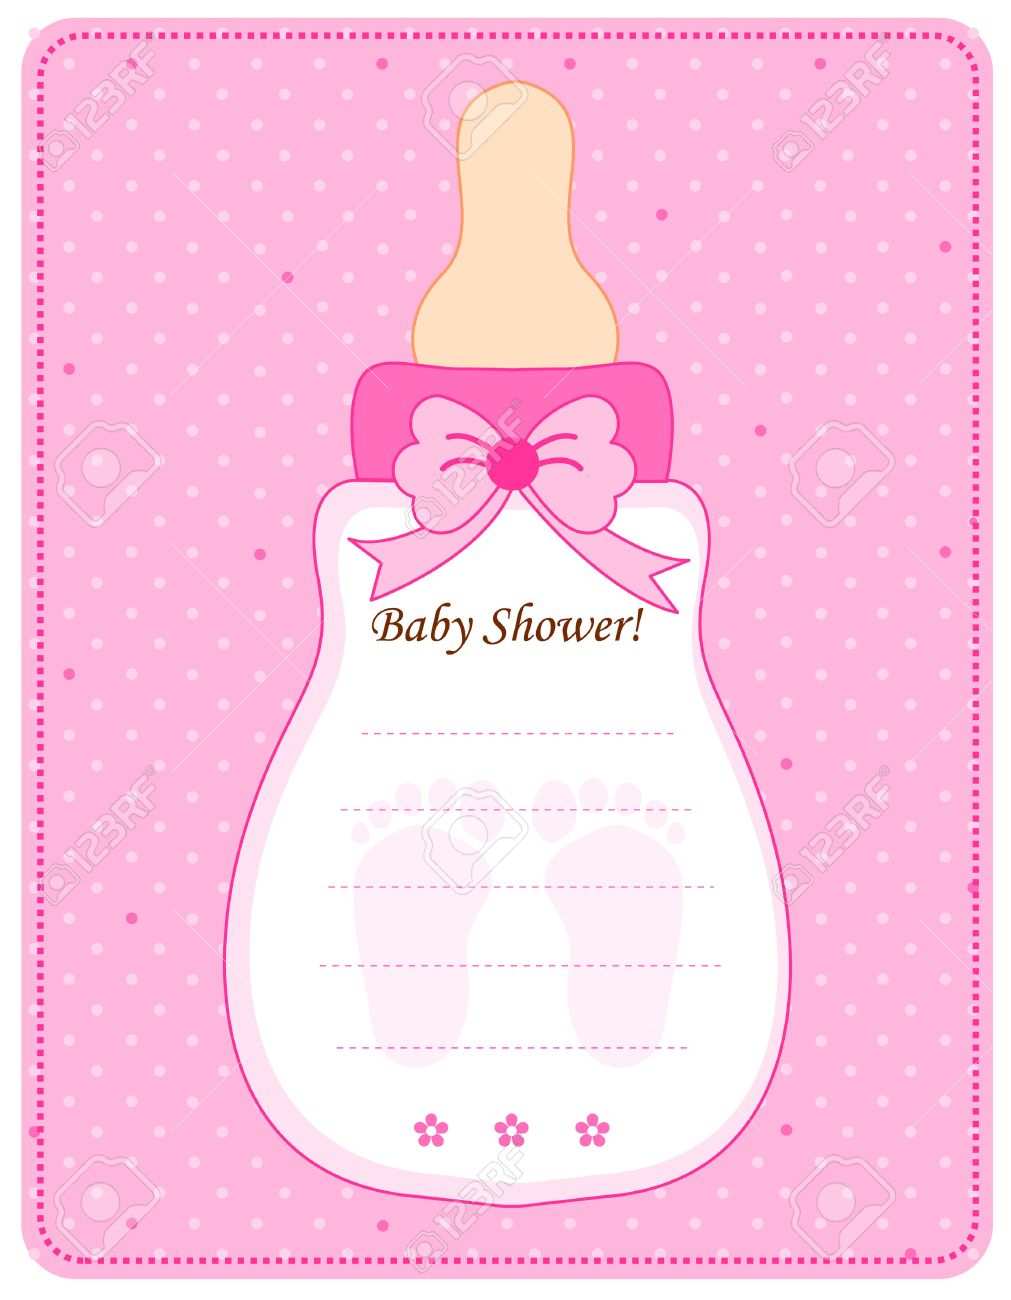 72 Customize Our Free Invitation Card Template Baby Shower For Free for Invitation Card Template Baby Shower